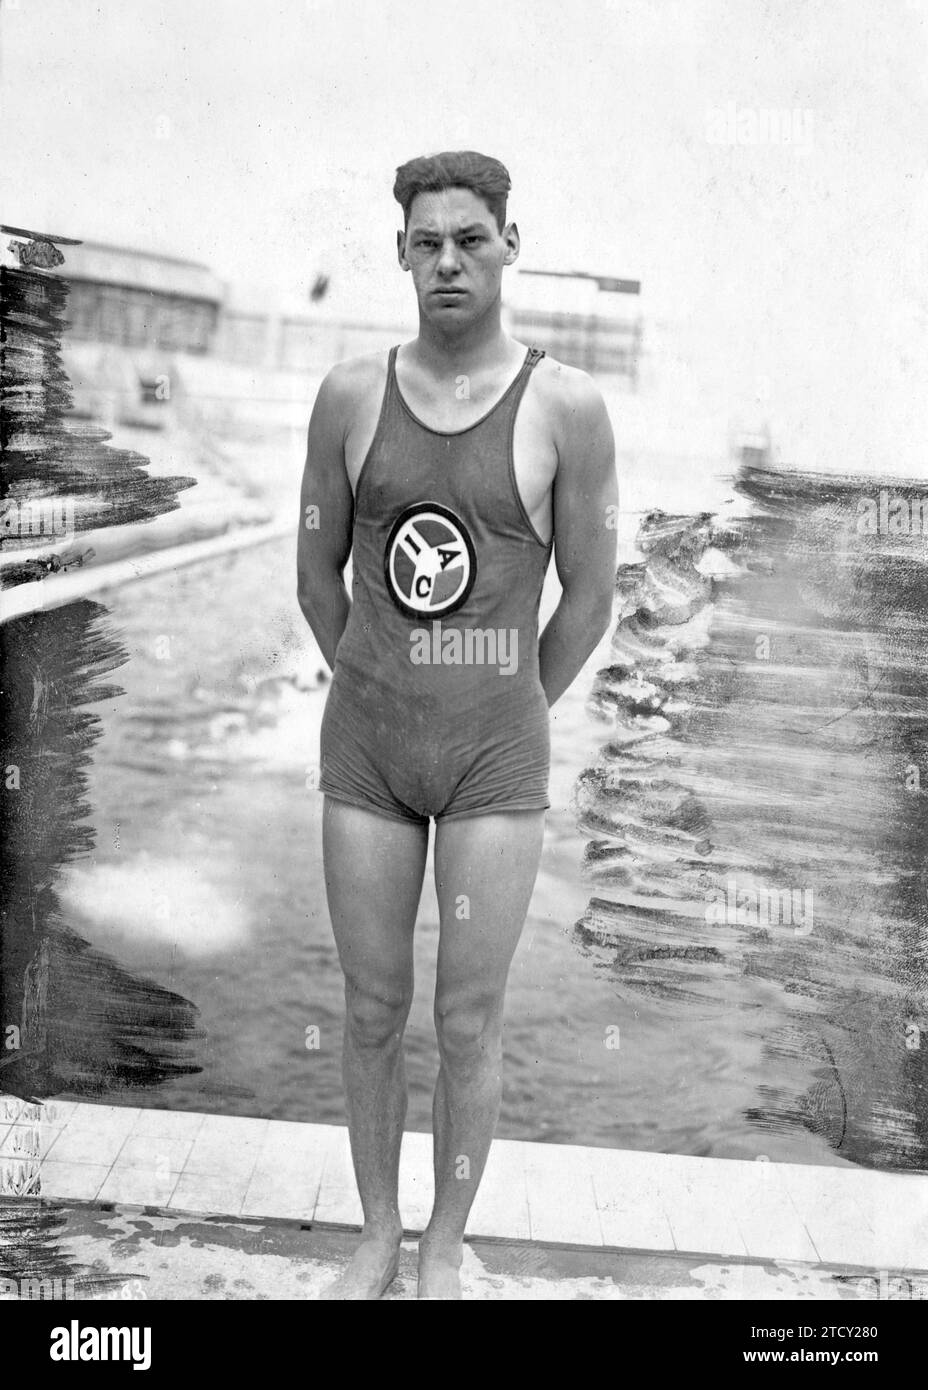 Paris, 1924 Olympics. Weissmuller Broke the Record for the 400 Meter ...